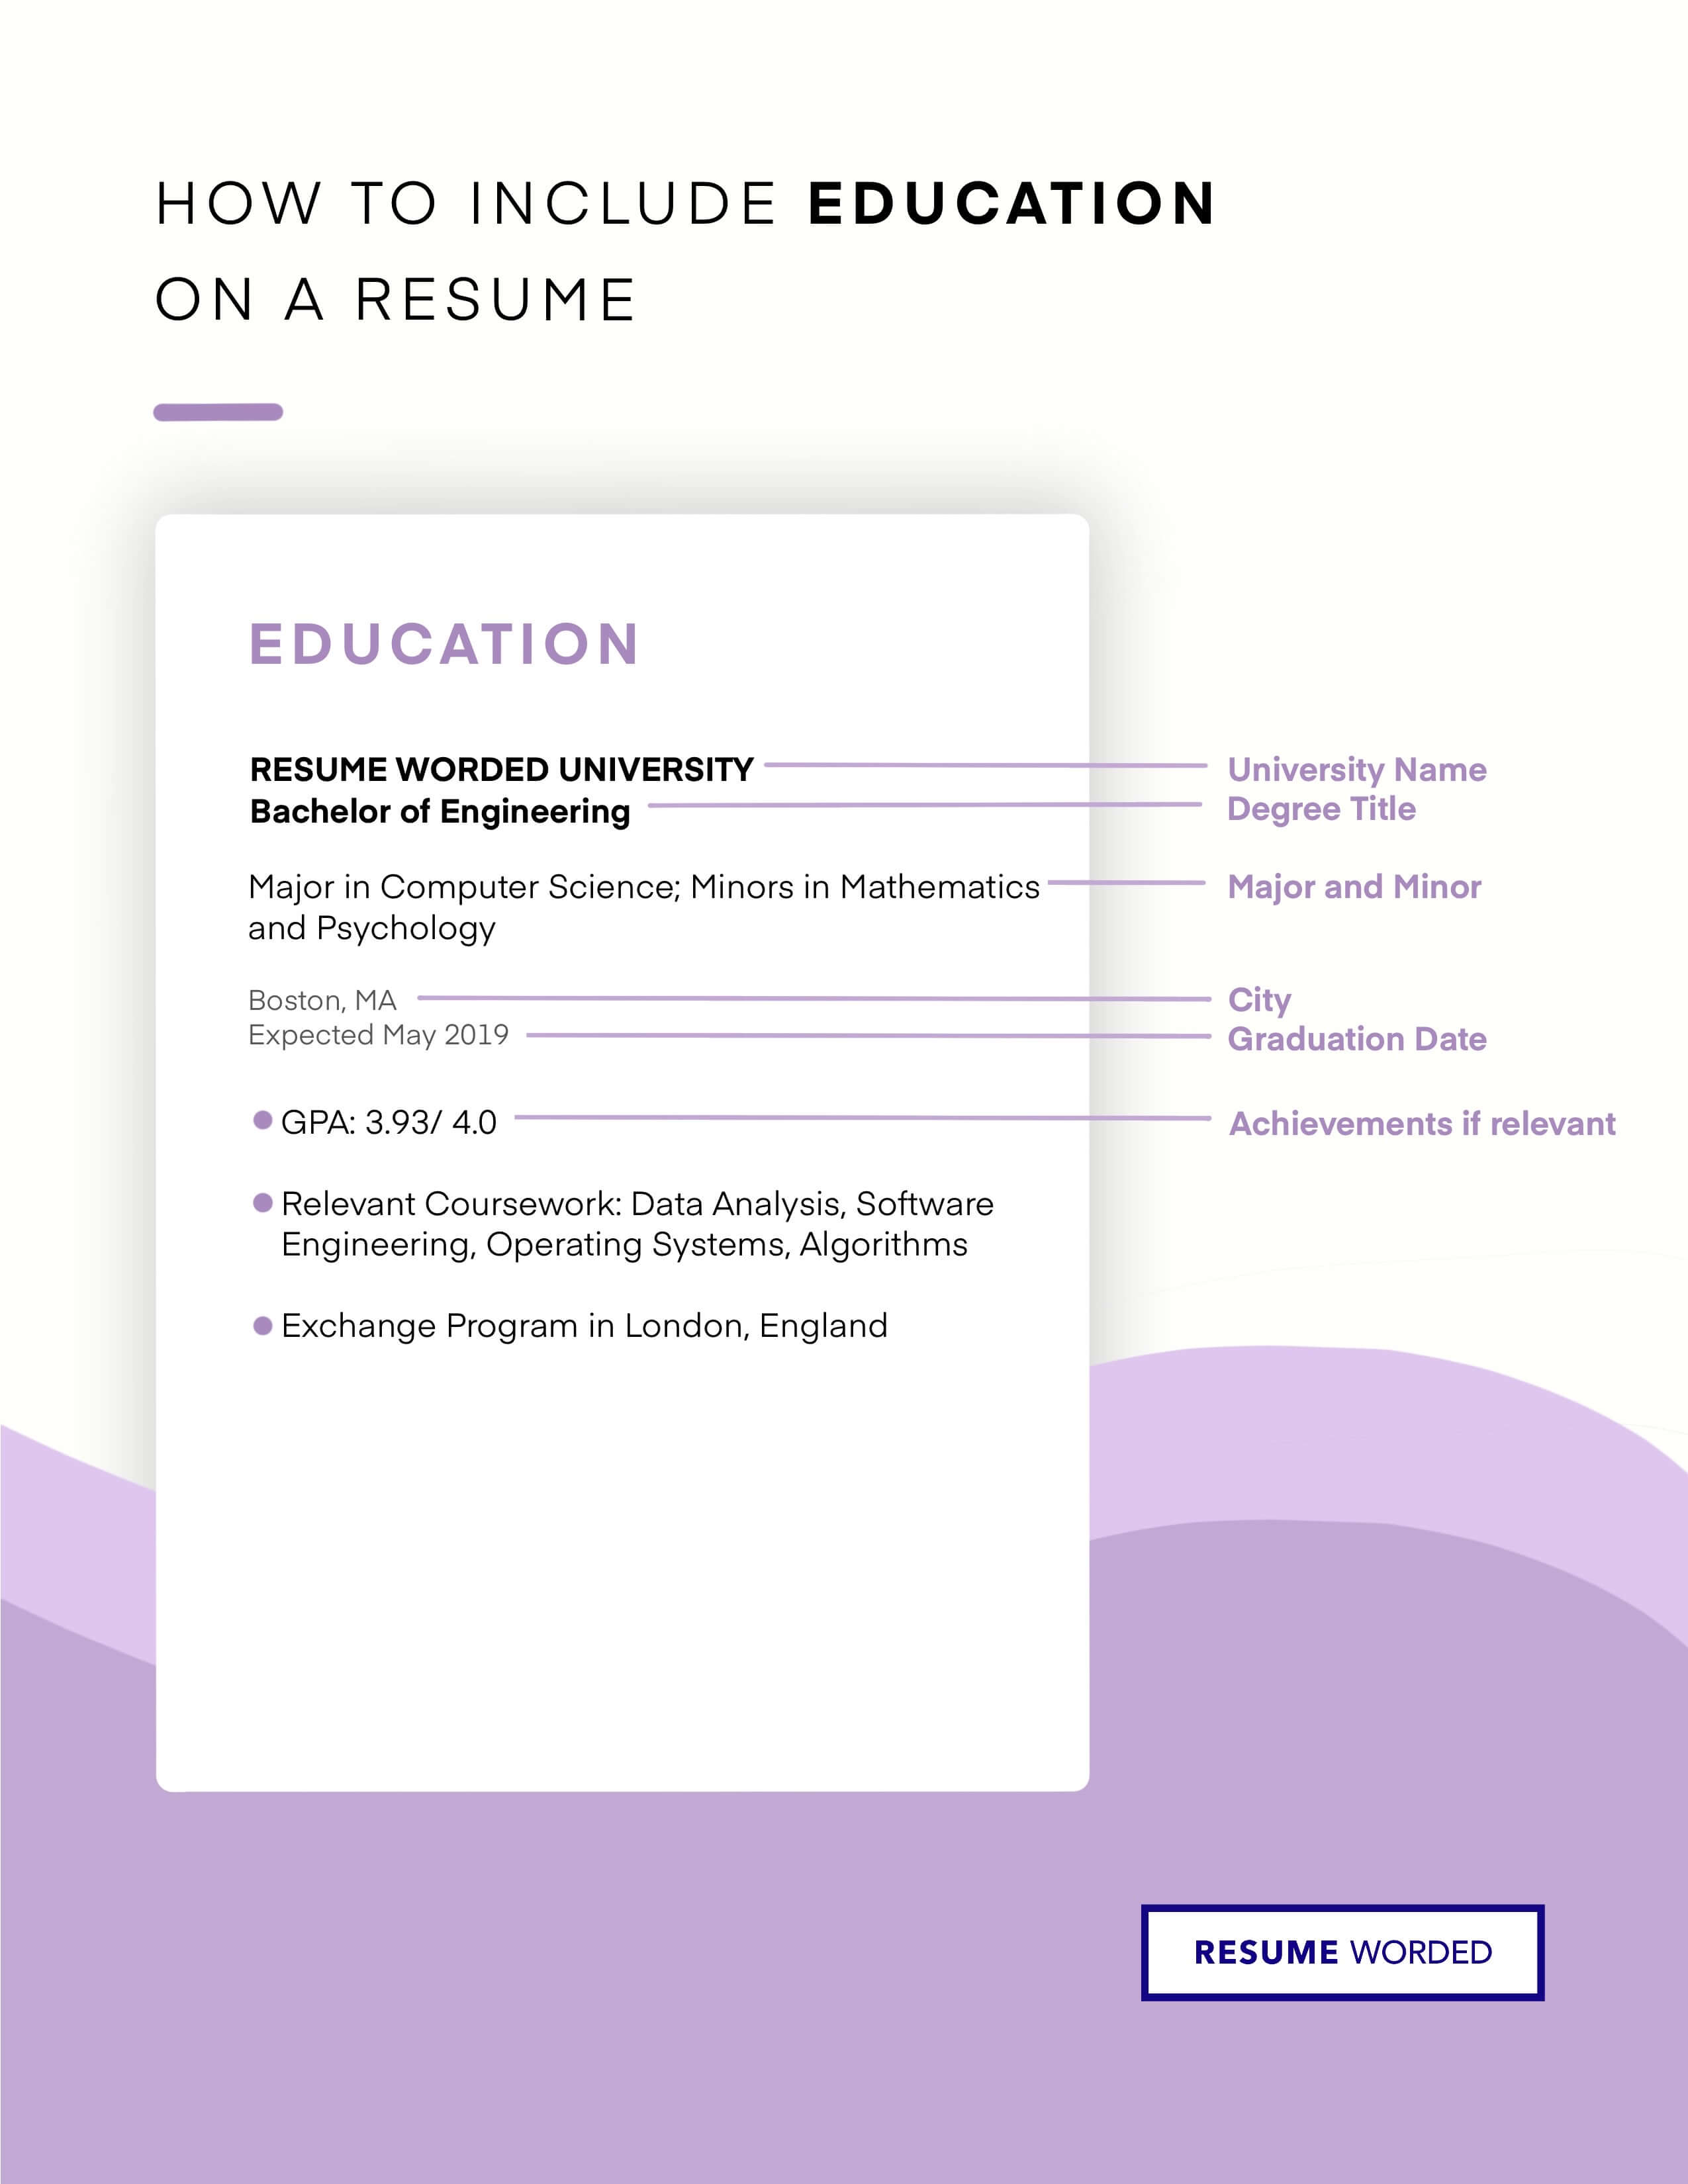 Highlight your education by including relevant certifications. - Senior Director of Technology Resume